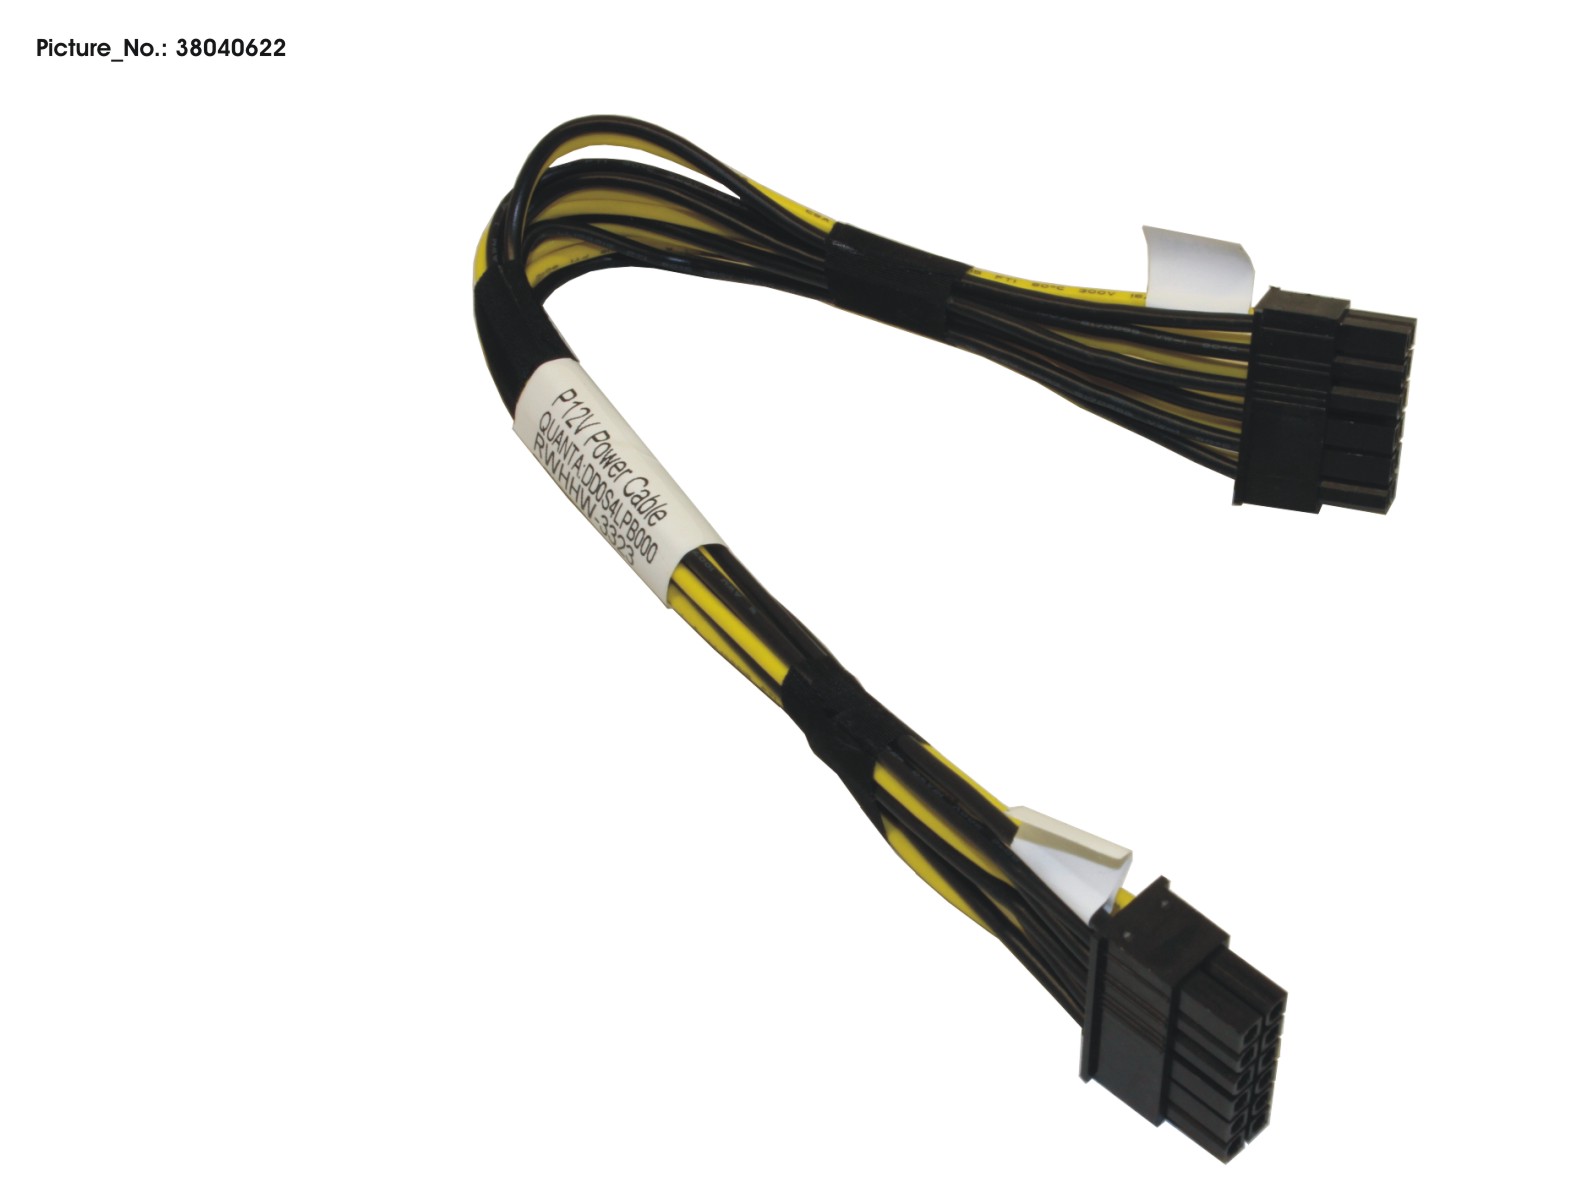 CBL POWER CABLE 1